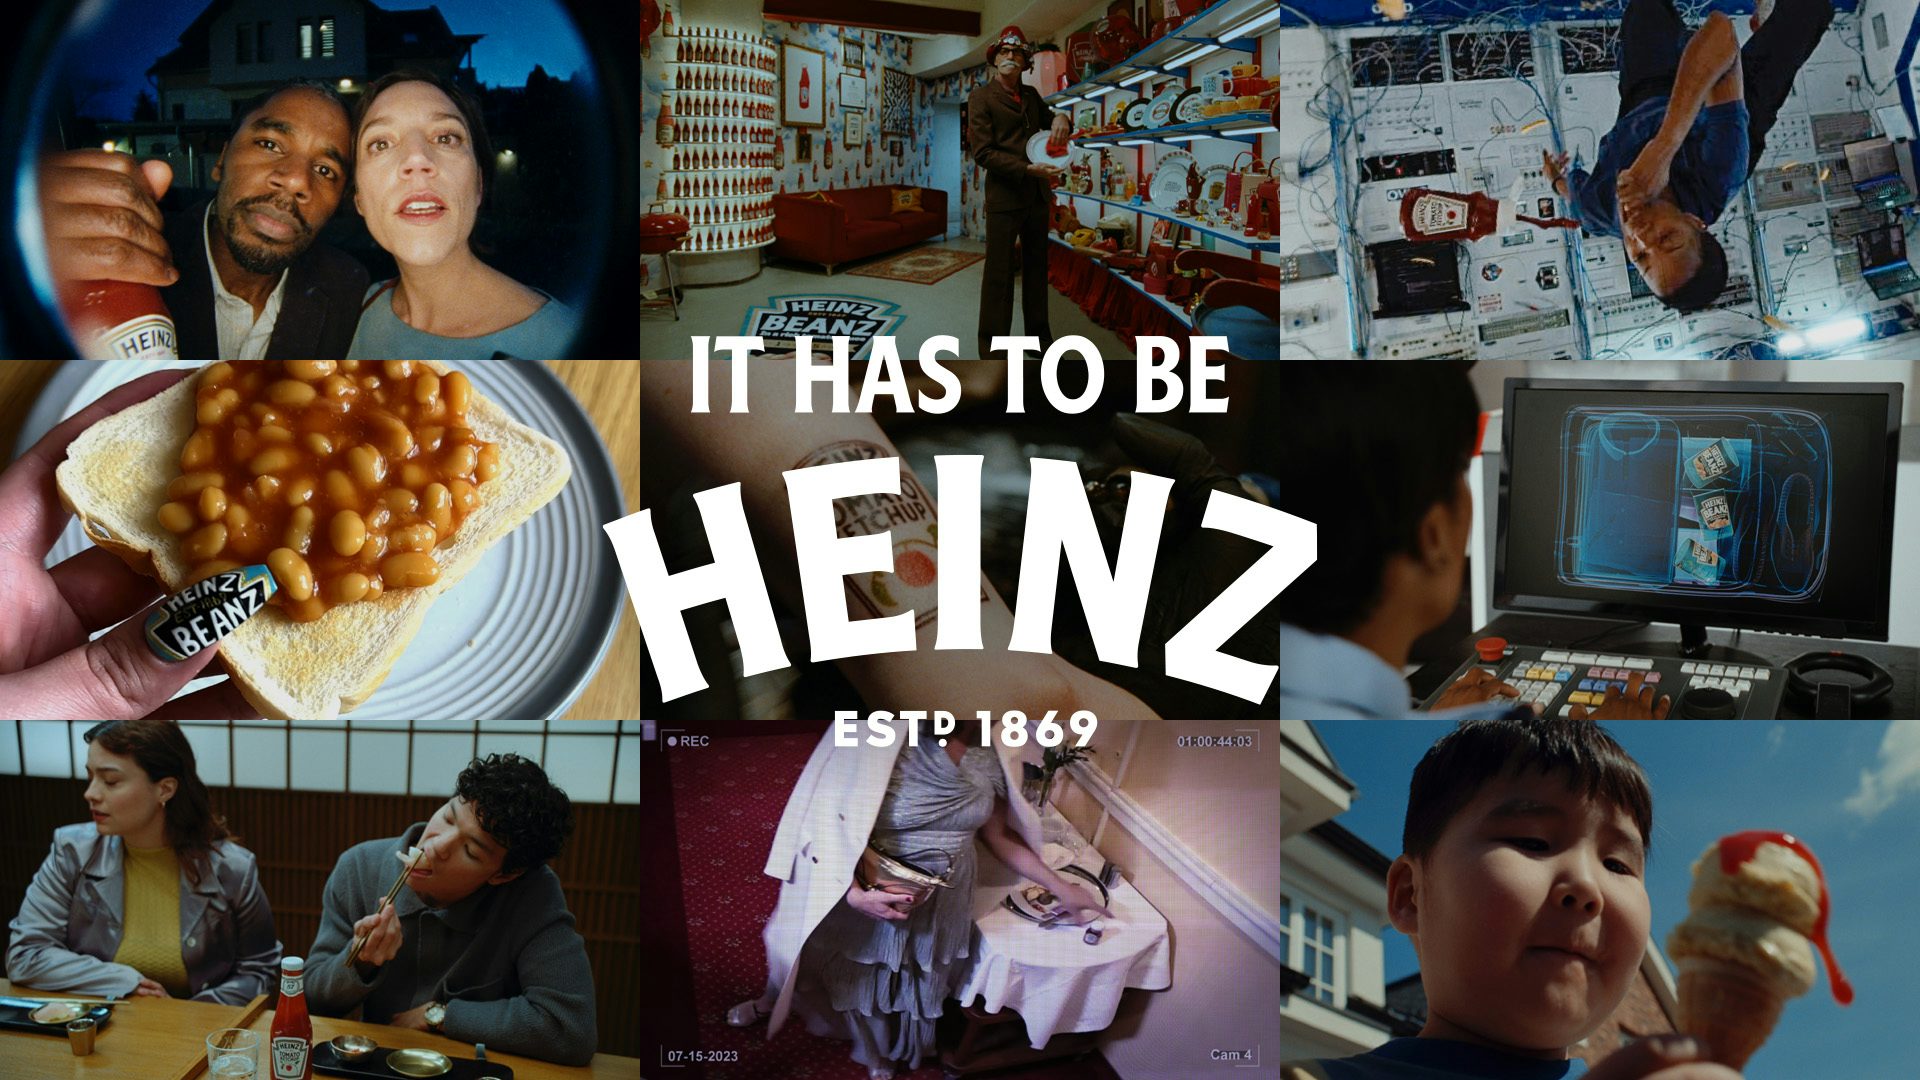 Heinz: Heinz Ketchup Pour Perfectly • Ads of the World™